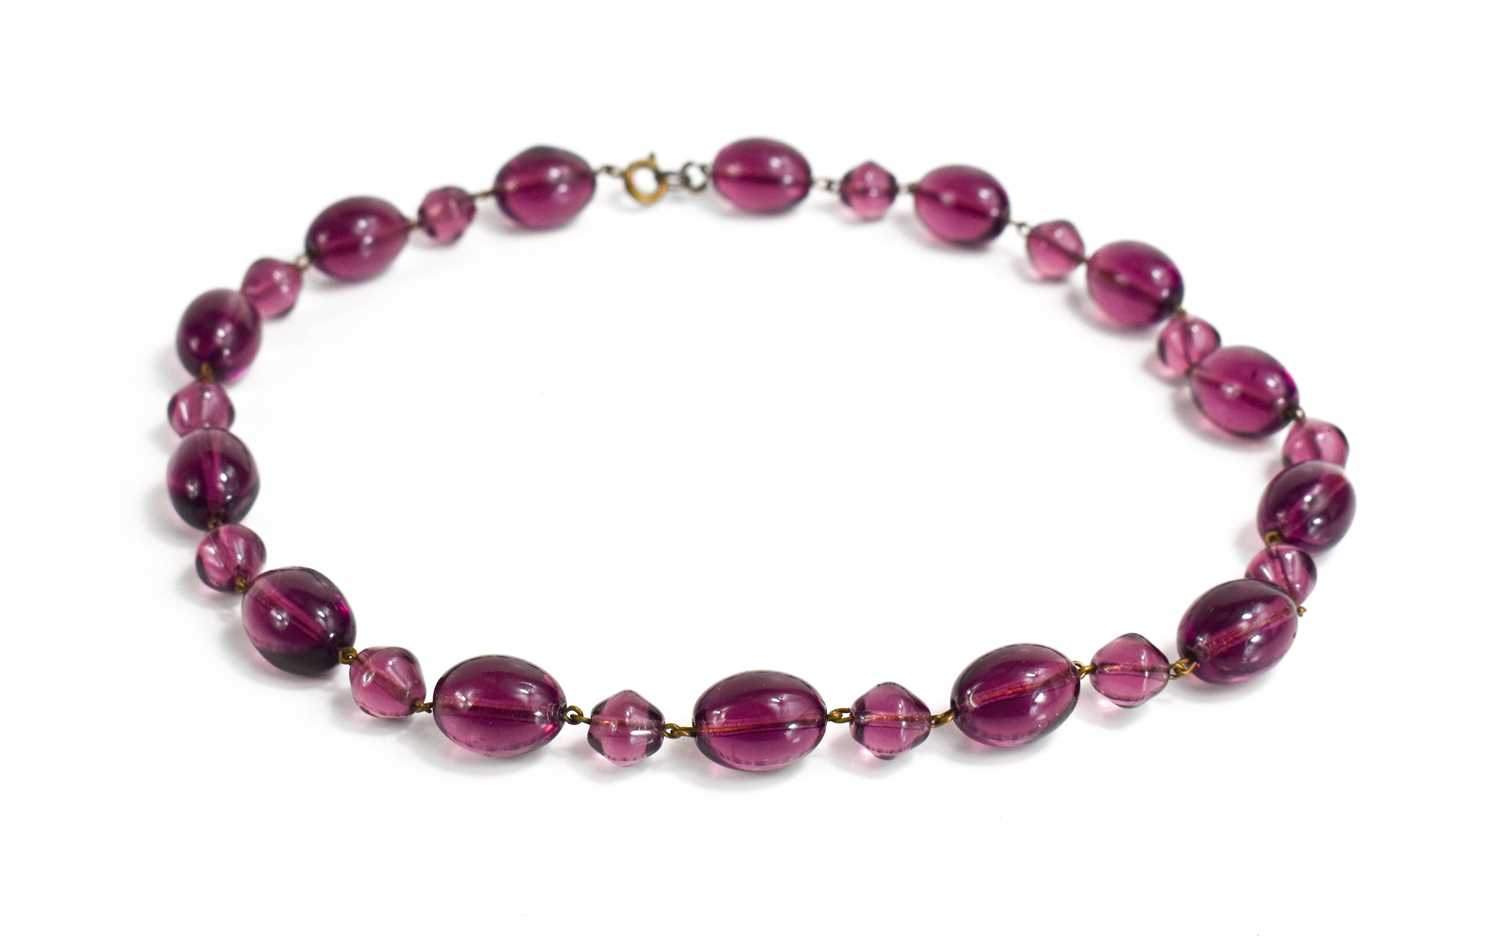 An antique amethyst beaded necklace, 49g, 40cm long.